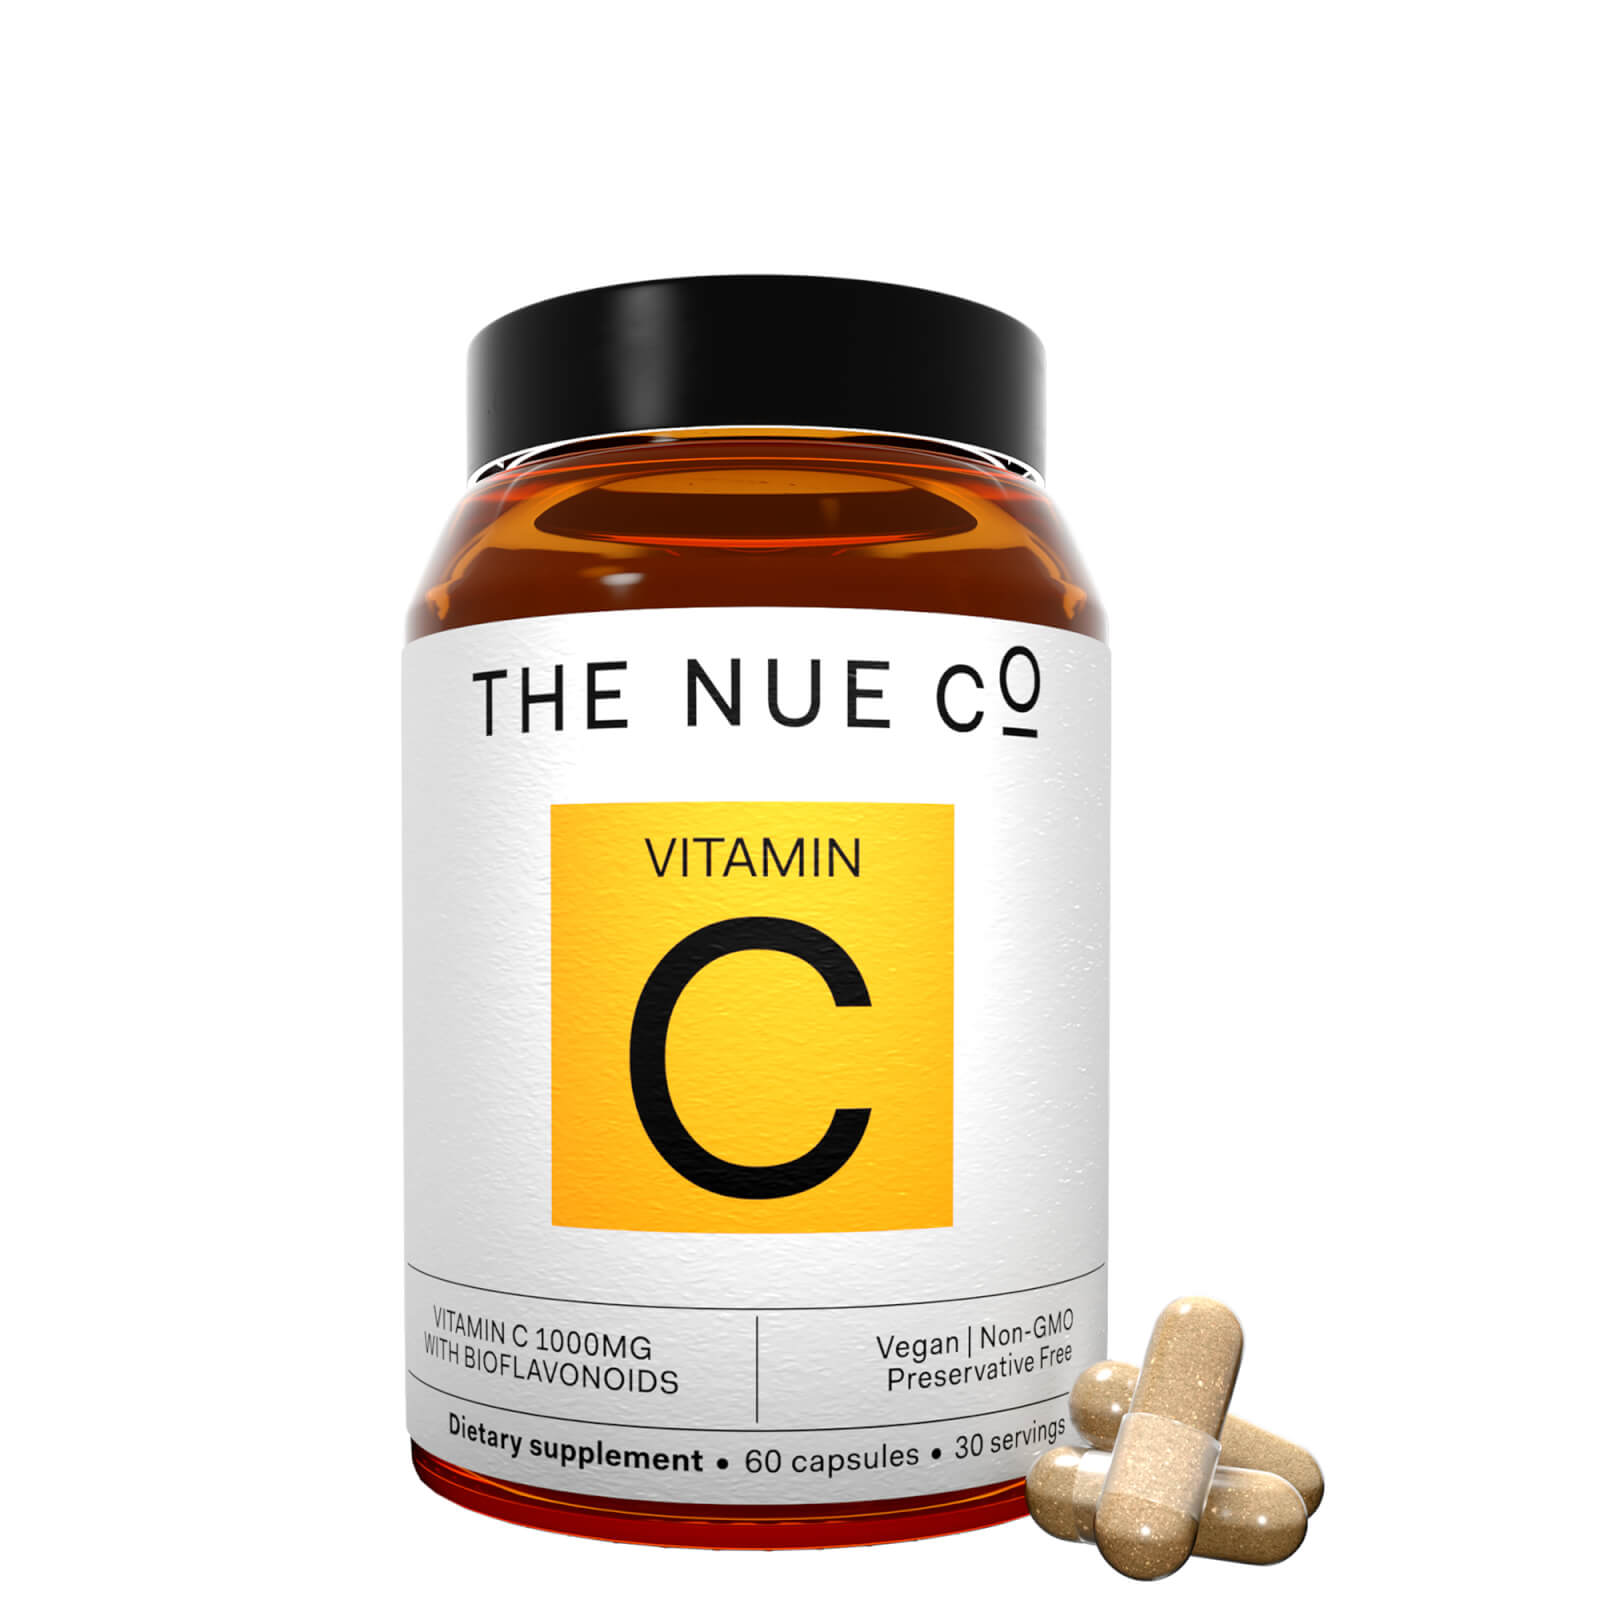 Photos - Vitamins & Minerals The Nue Co. Vitamin C Supplement To Support Immunity (60 Capsules)